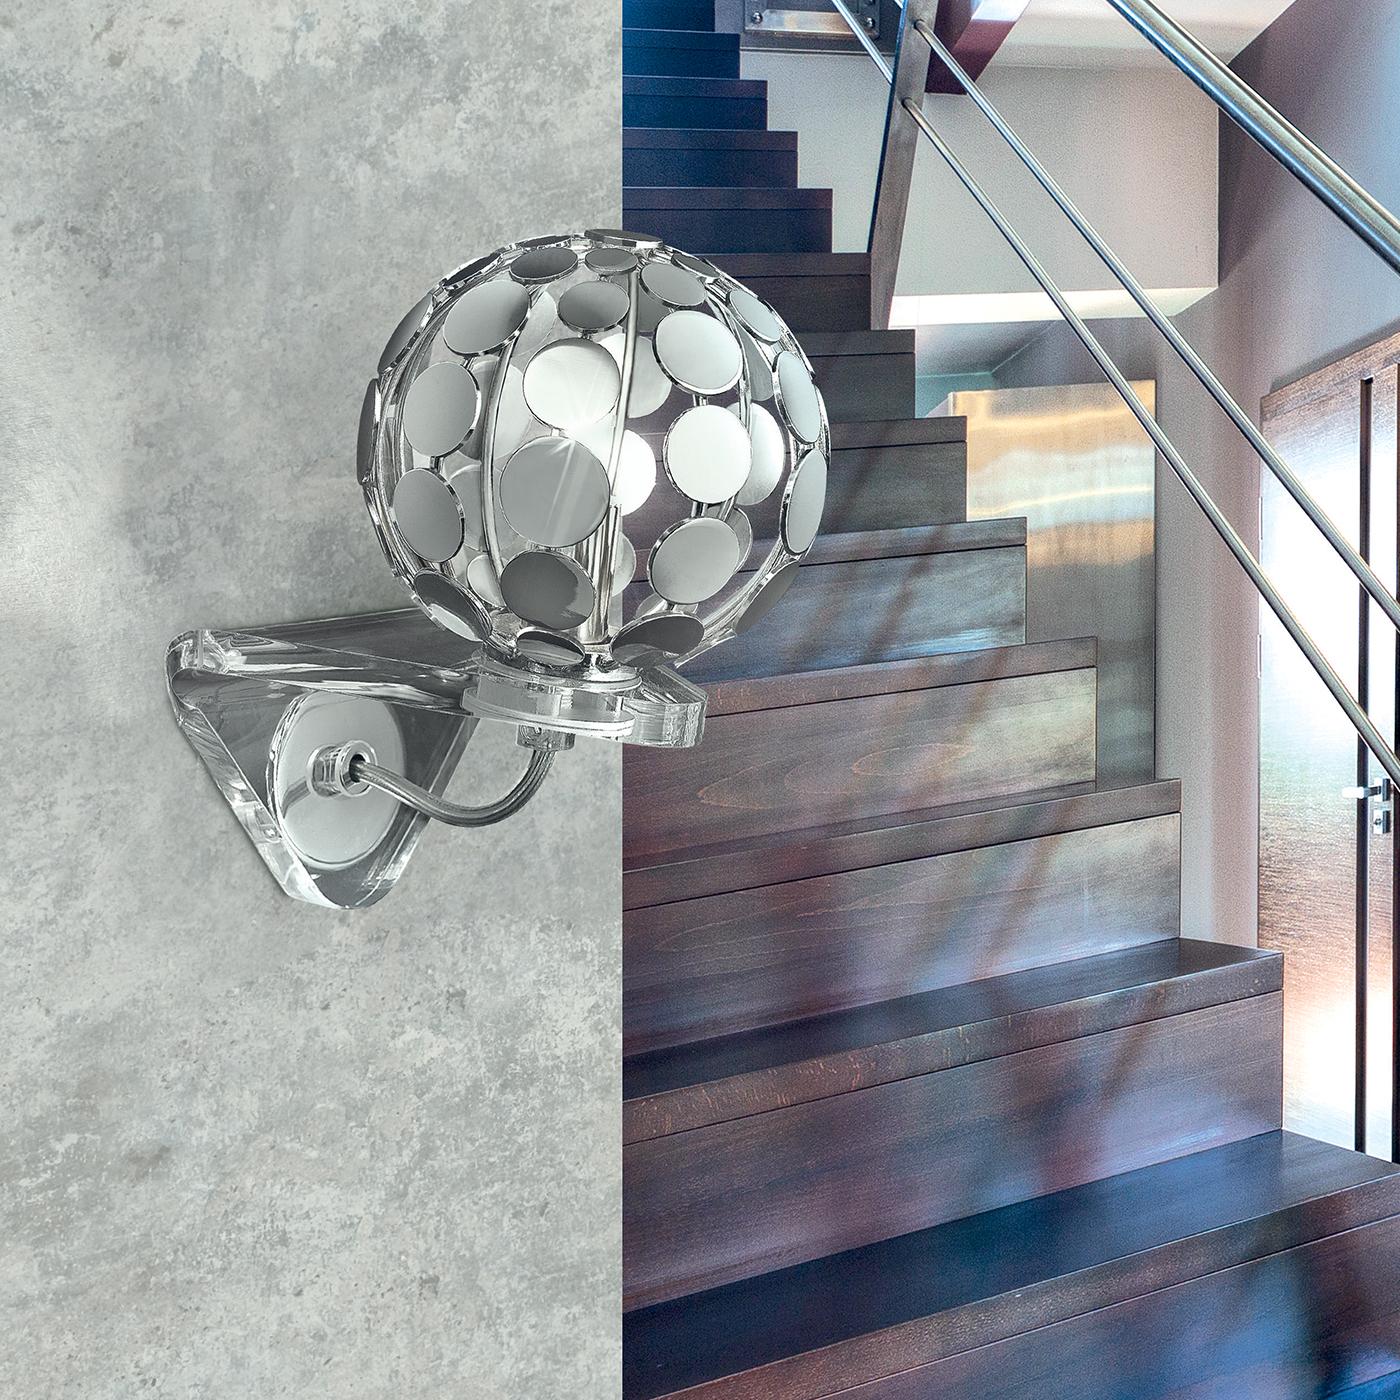 Inject a glamorous touch into any living space with the disco ball wall light. Its spherical diffuser is formed of individual chrome discs, projecting a dazzling interplay of light effects onto the walls. Finished with a transparent triangular base